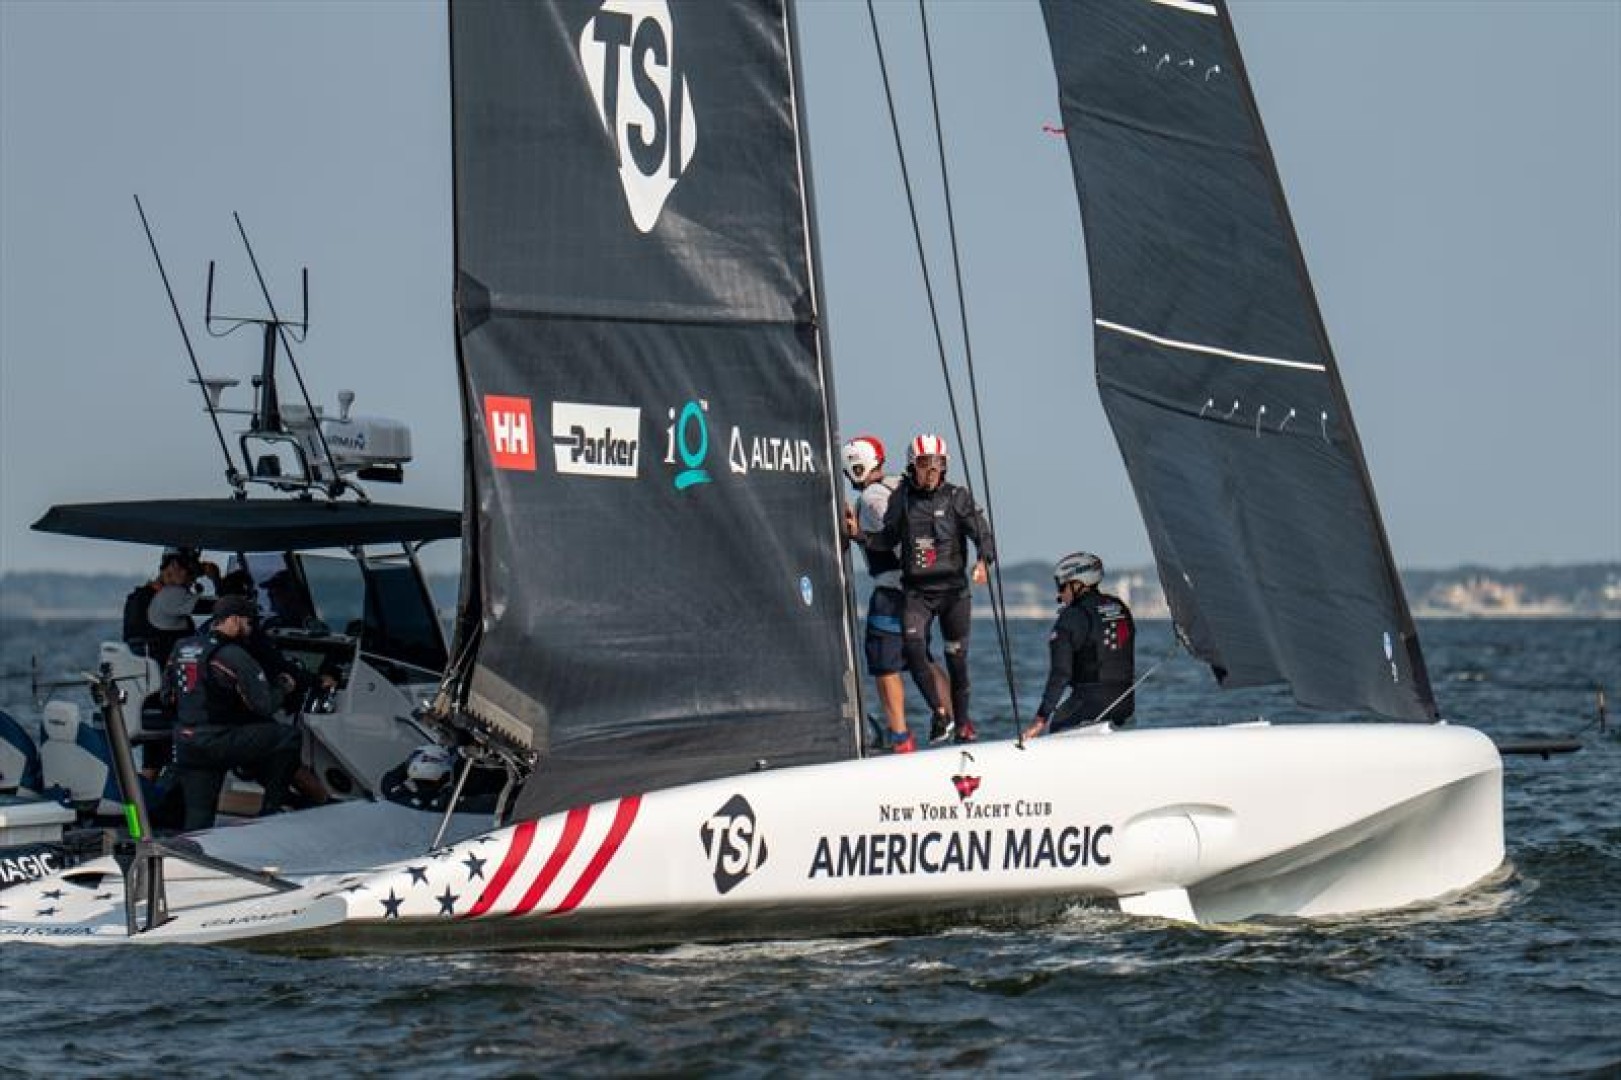 ©Paul Todd/AMERICA’S CUP